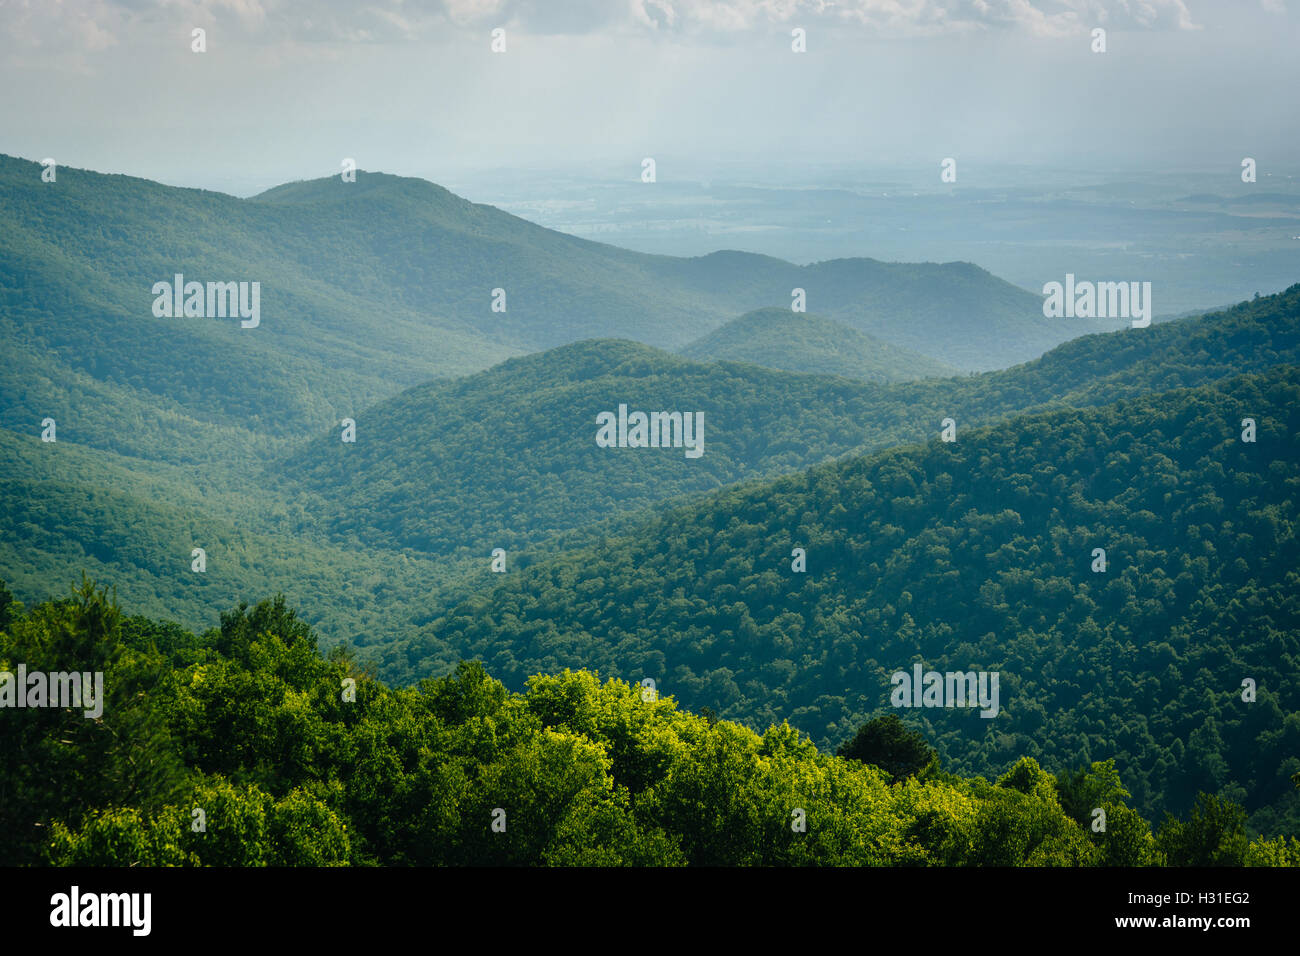 View of the Blue Ridge from Blackrock Summit, in Shenandoah National Park, Virginia. Stock Photo